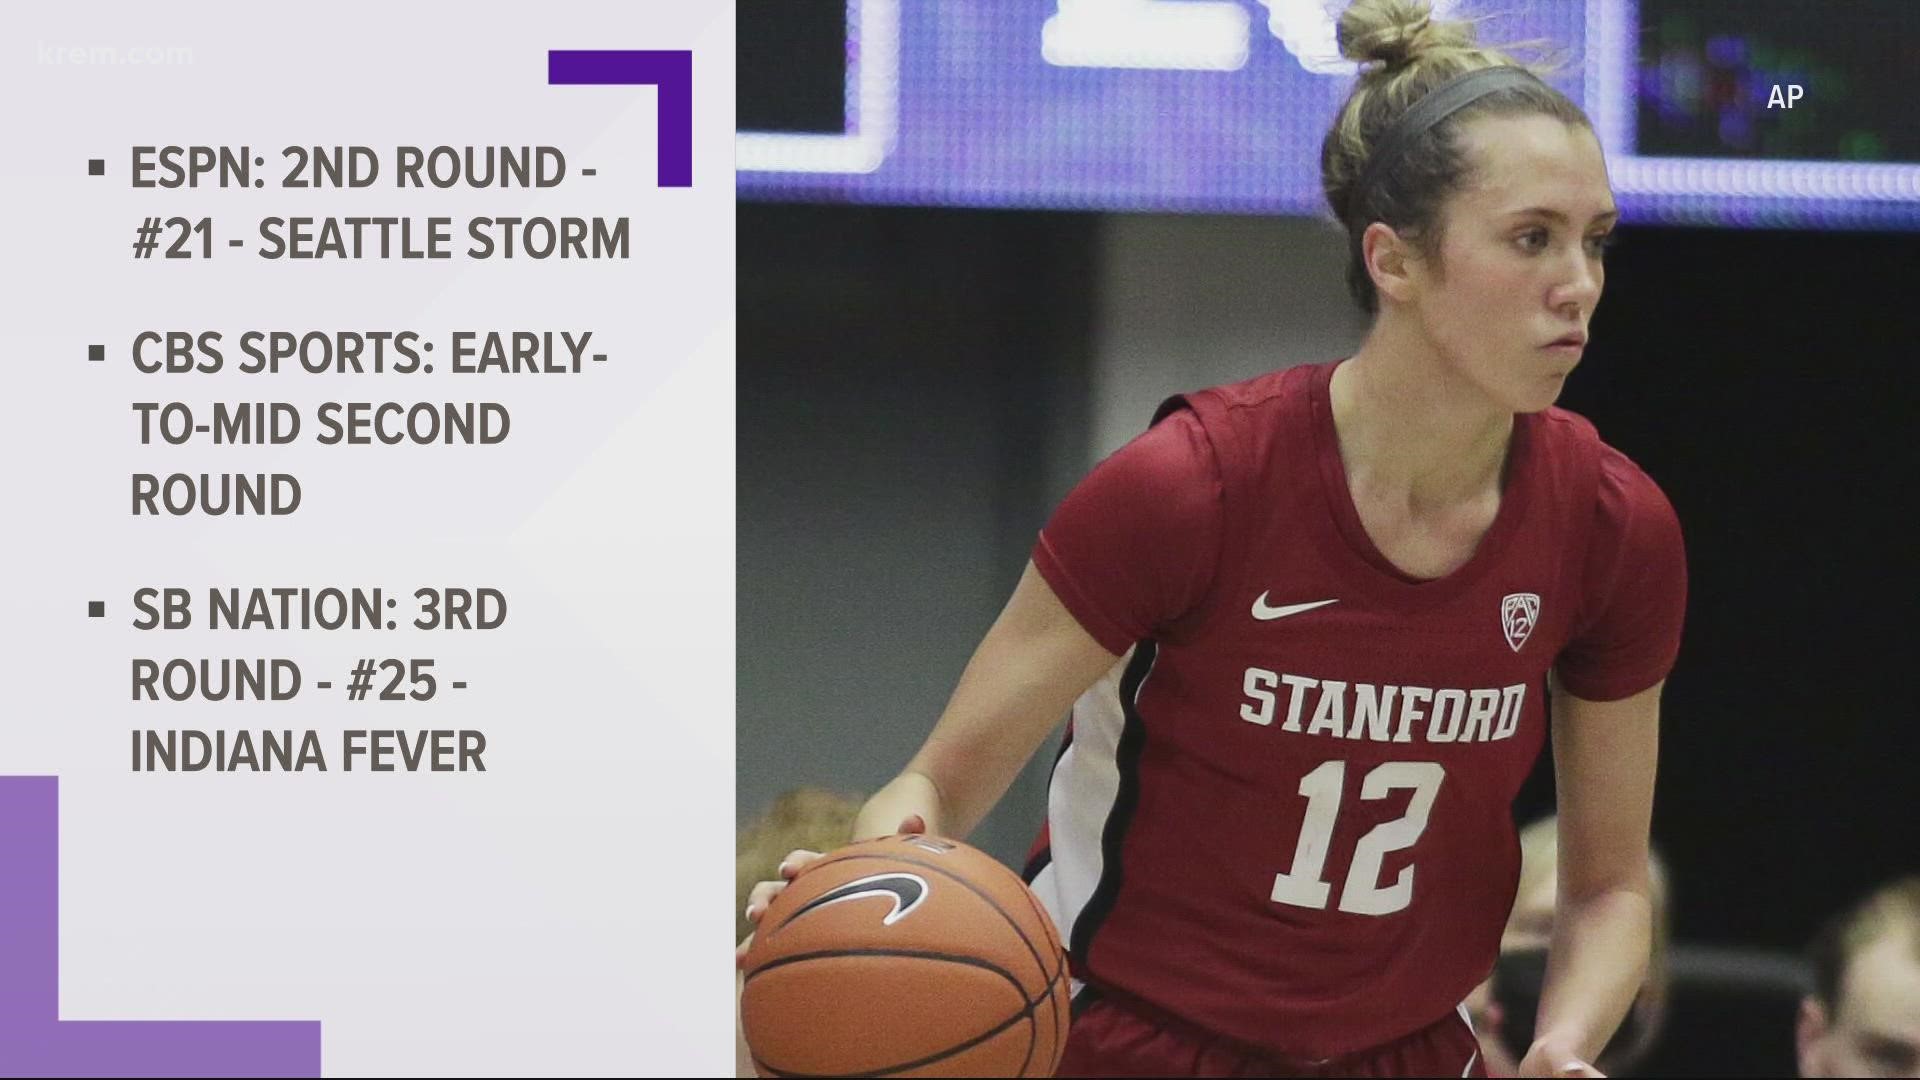 The 2022 WNBA Draft is a special one for Spokane as Central Valley alum Lexie Hull will likely have her name announced.